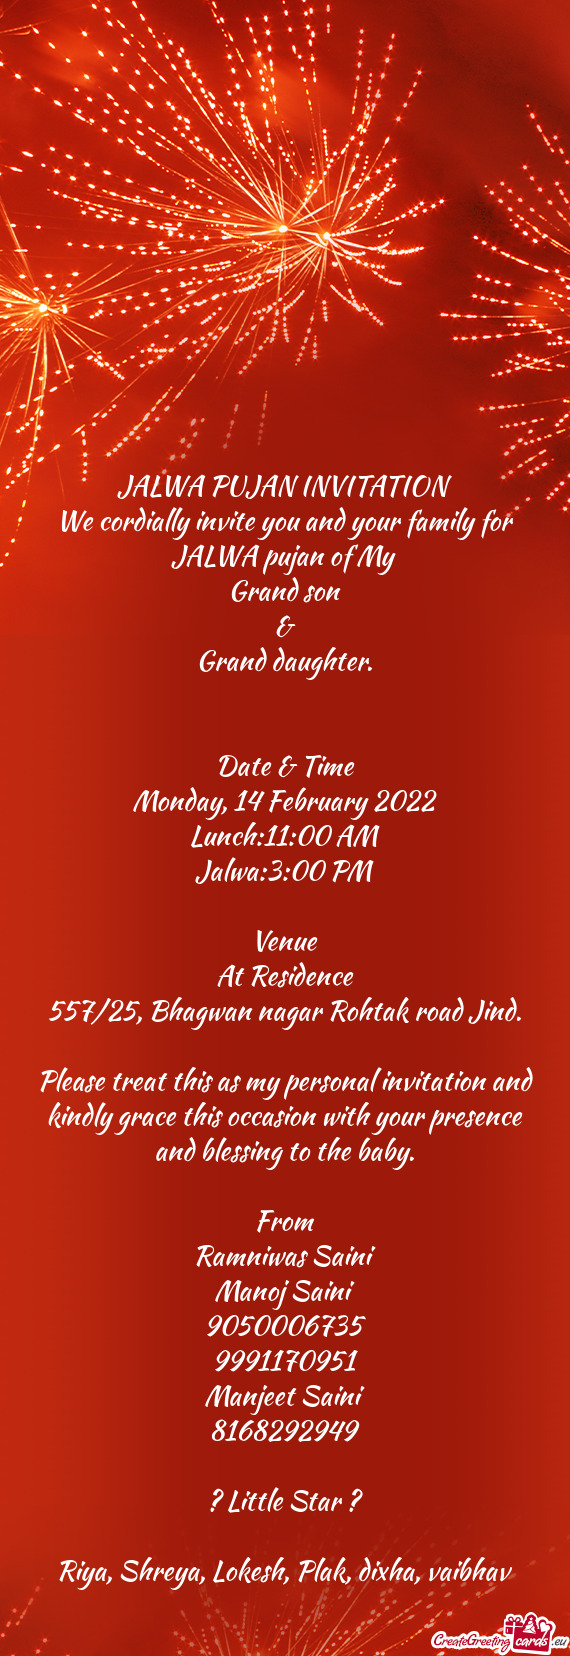 JALWA PUJAN INVITATION
 We cordially invite you and your family for JALWA pujan of My 
 Grand son
 &